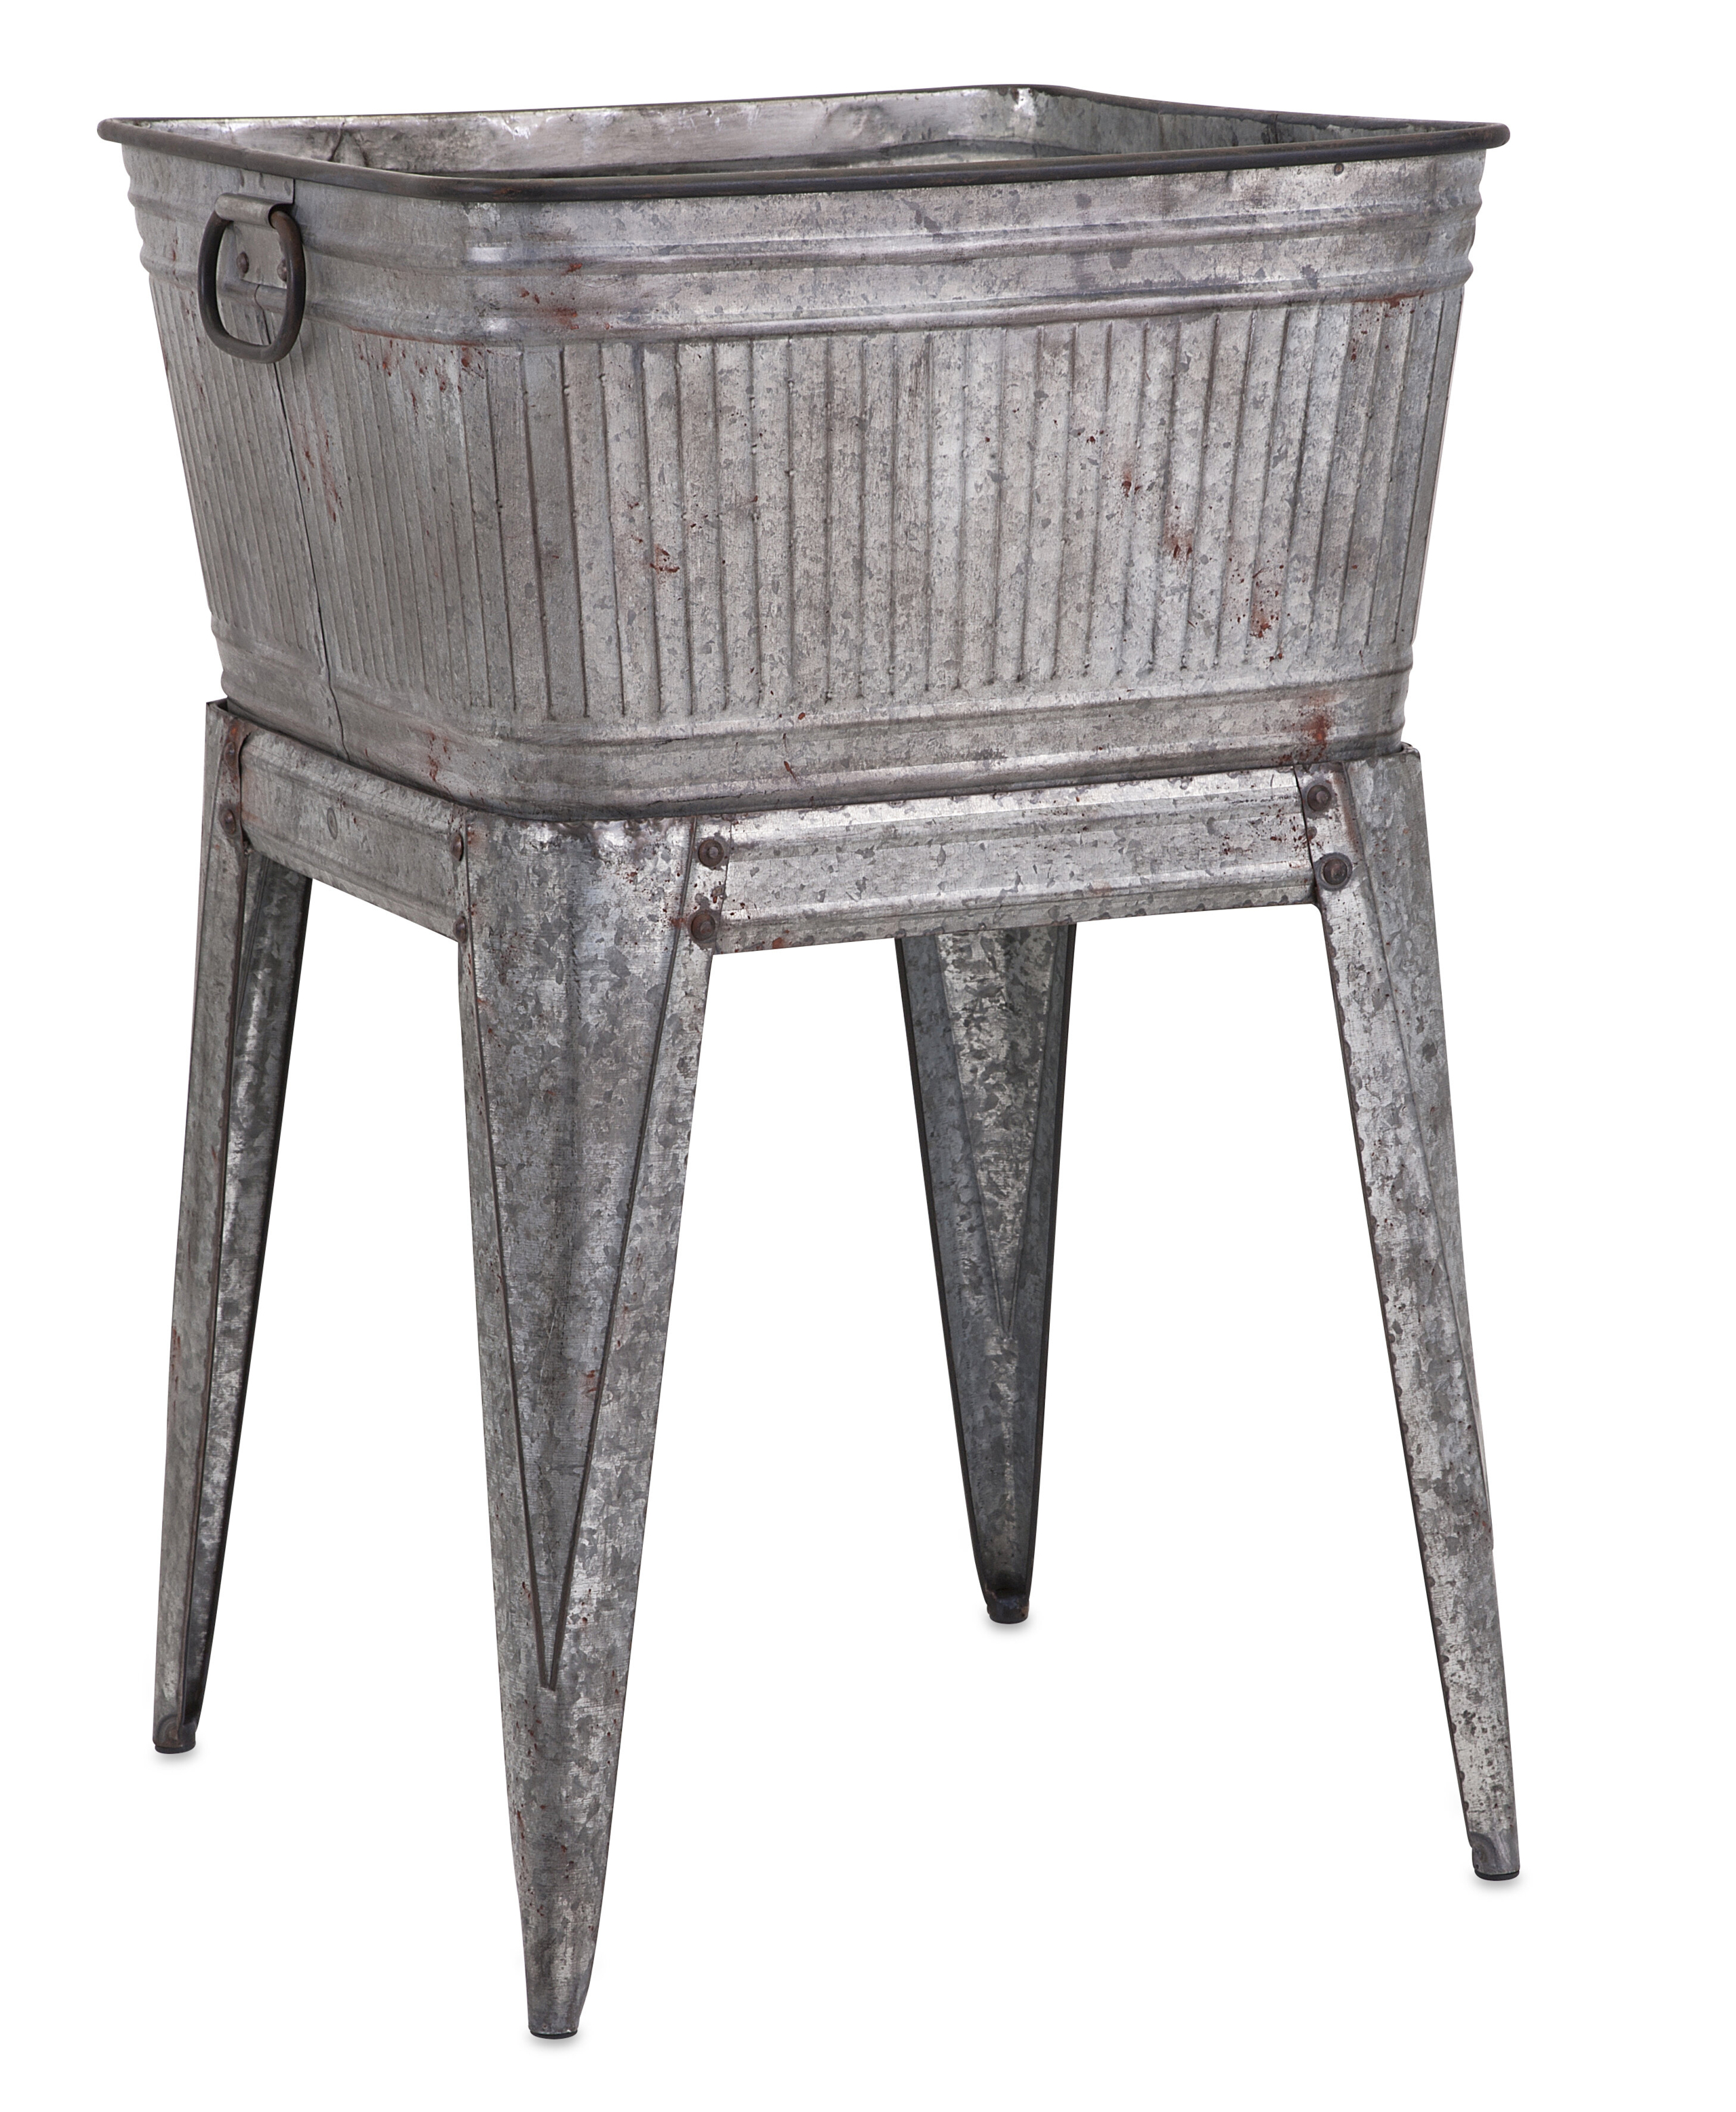 Perryman Square Beverage Tub on Stand